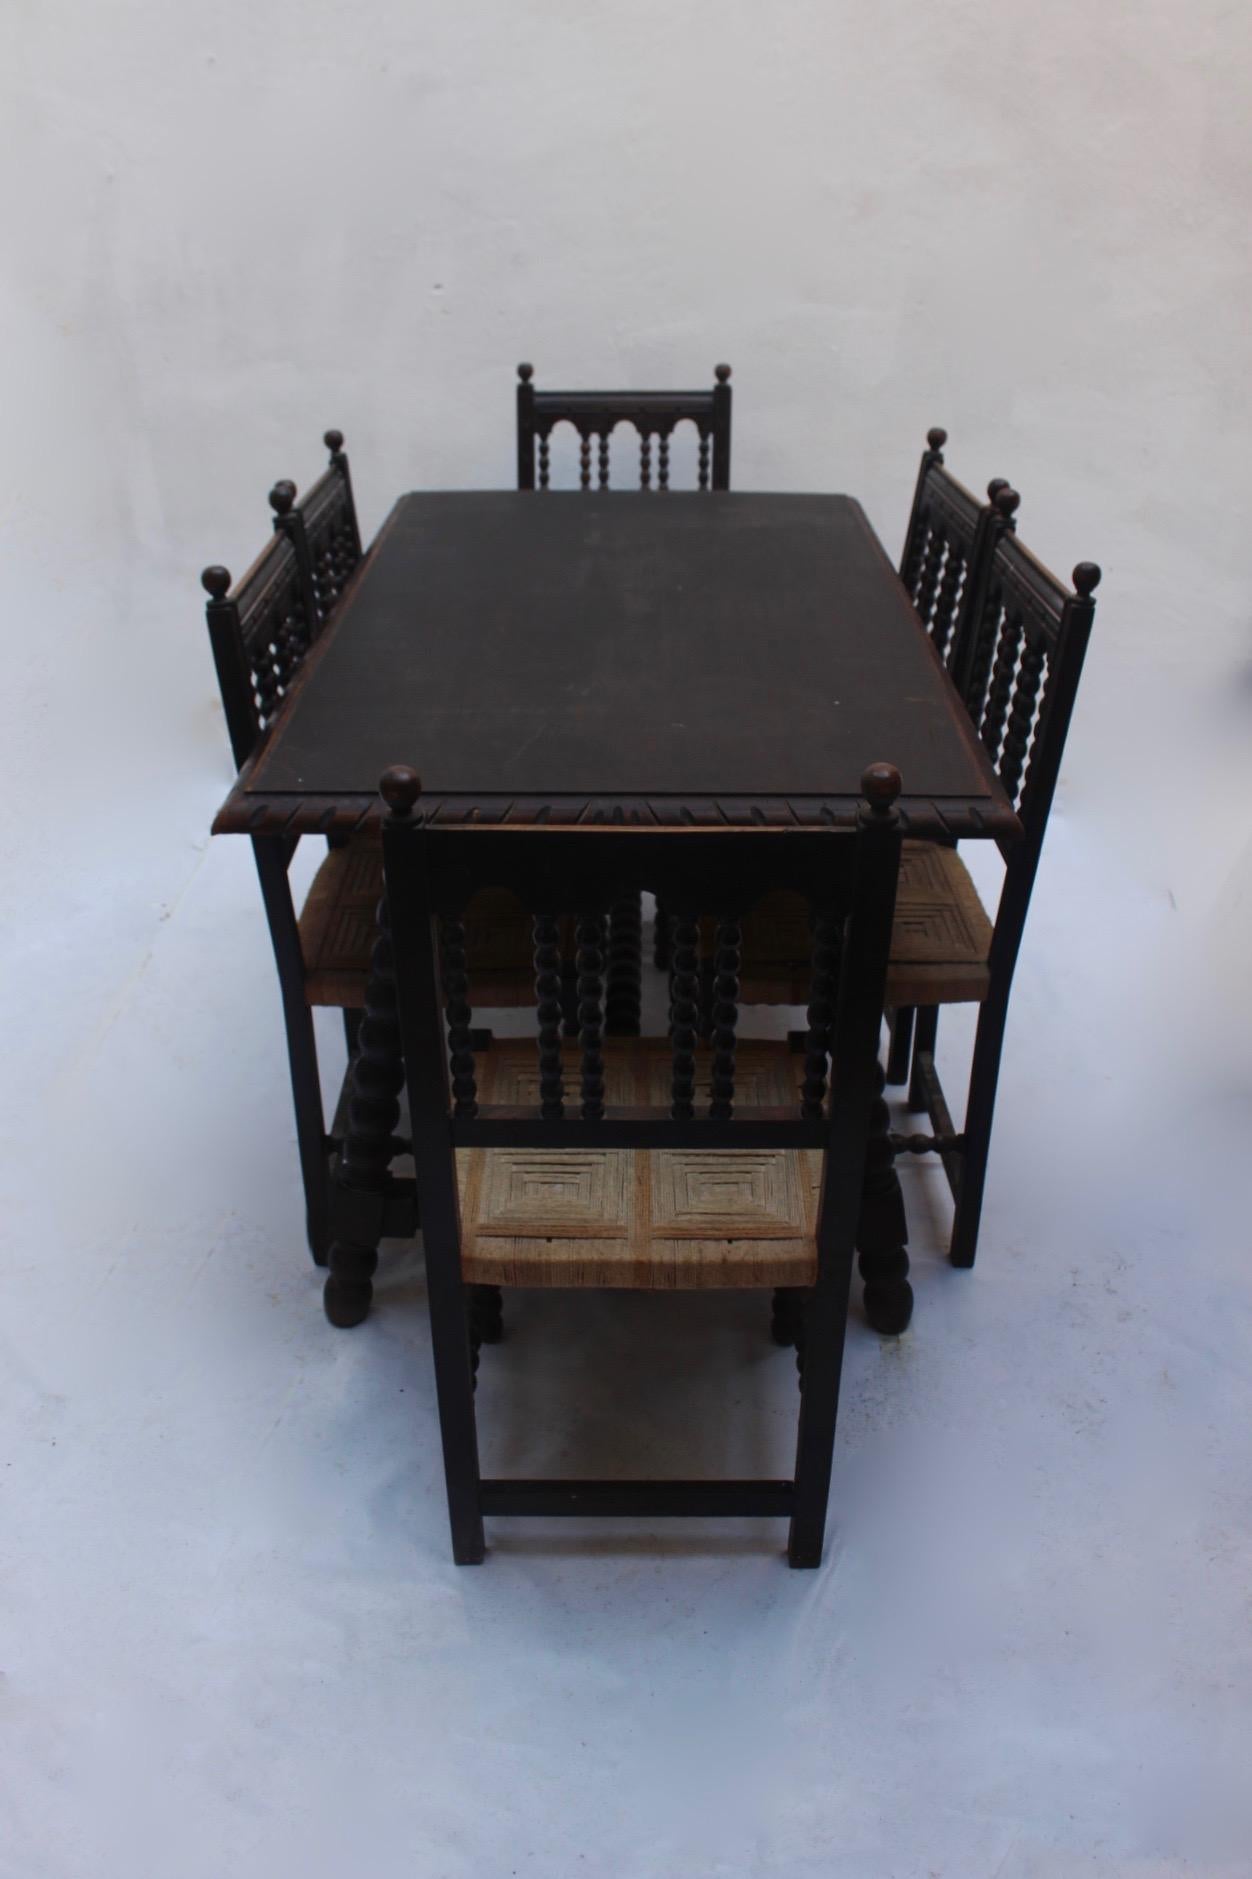 Baroque Revival Wood Dining Table Made in Spain, 19th Century 7